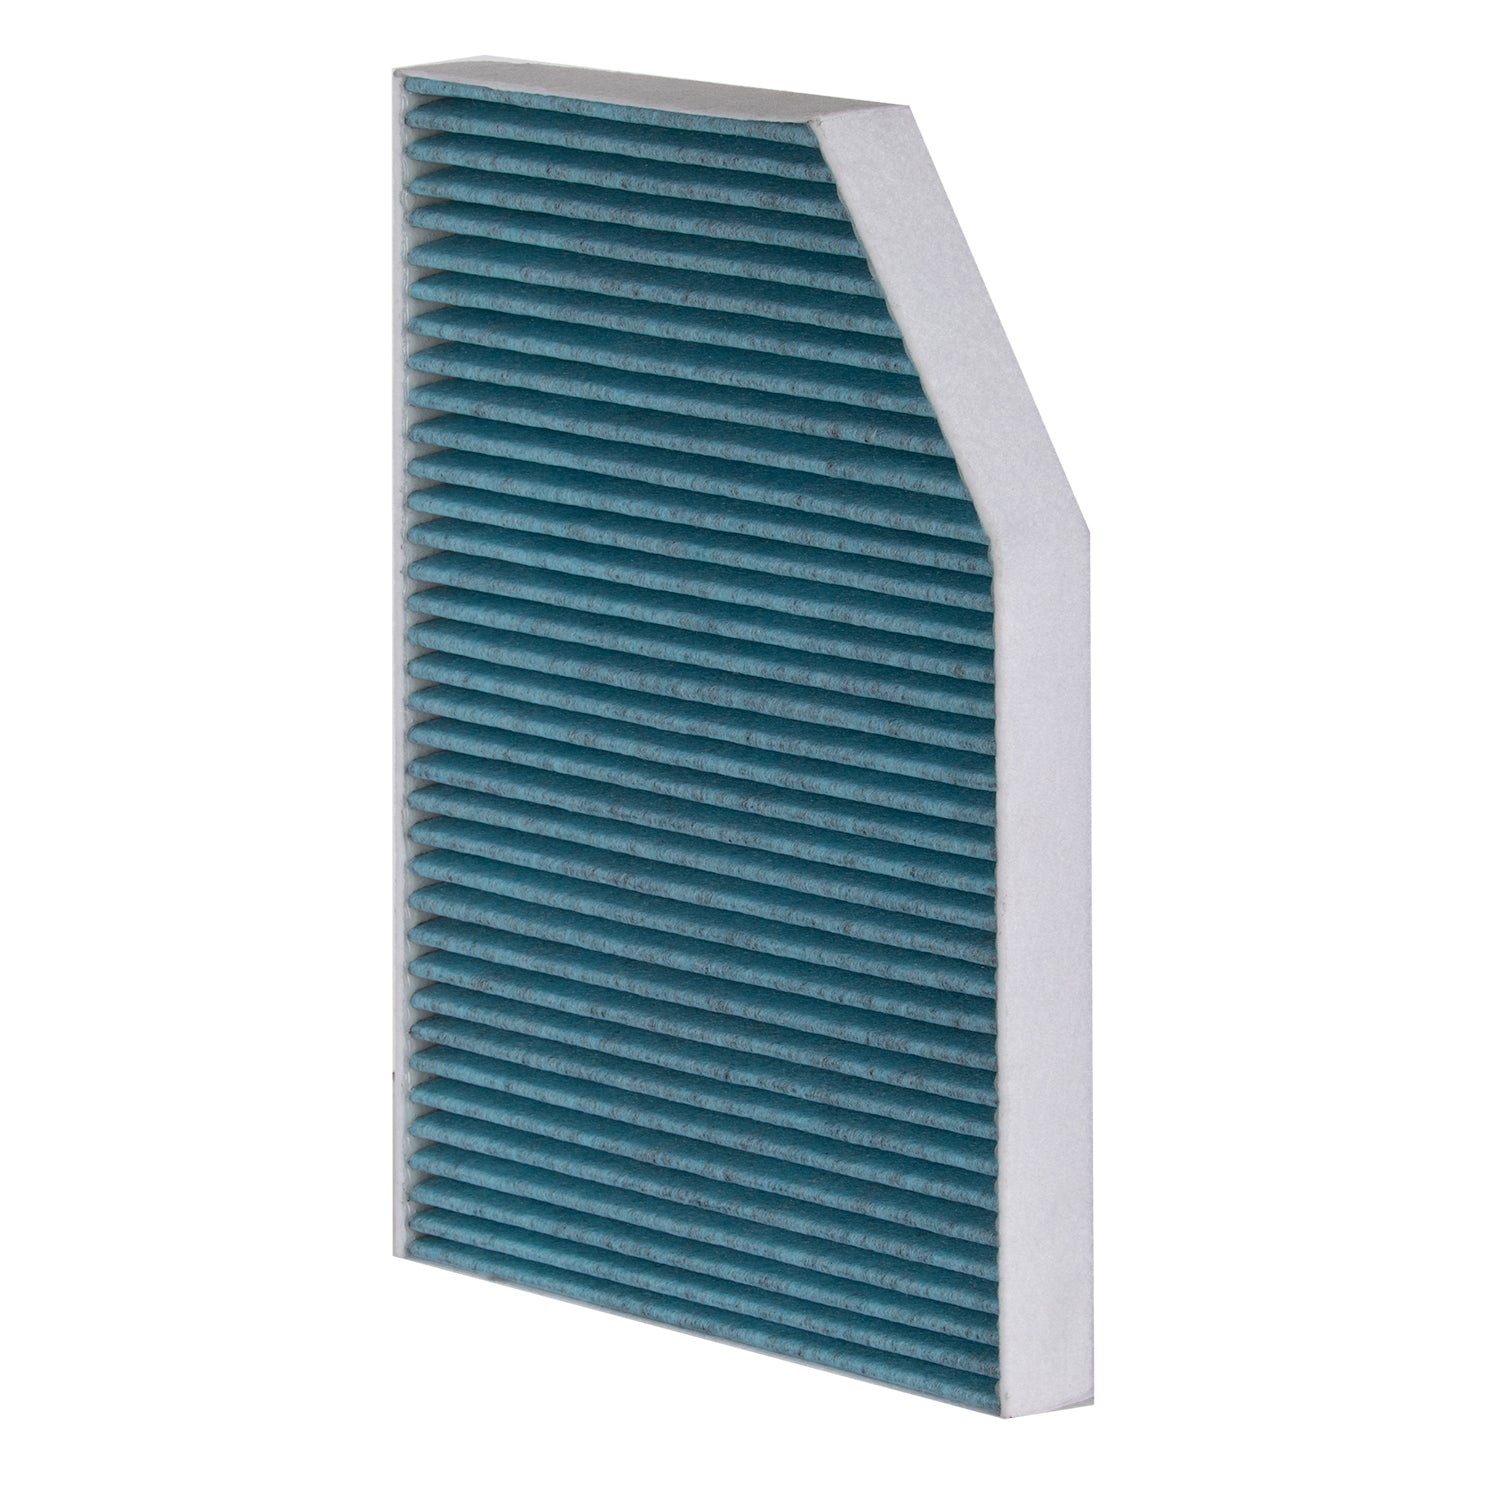 2021 BMW M340i Cabin Air Filter  PC99458X